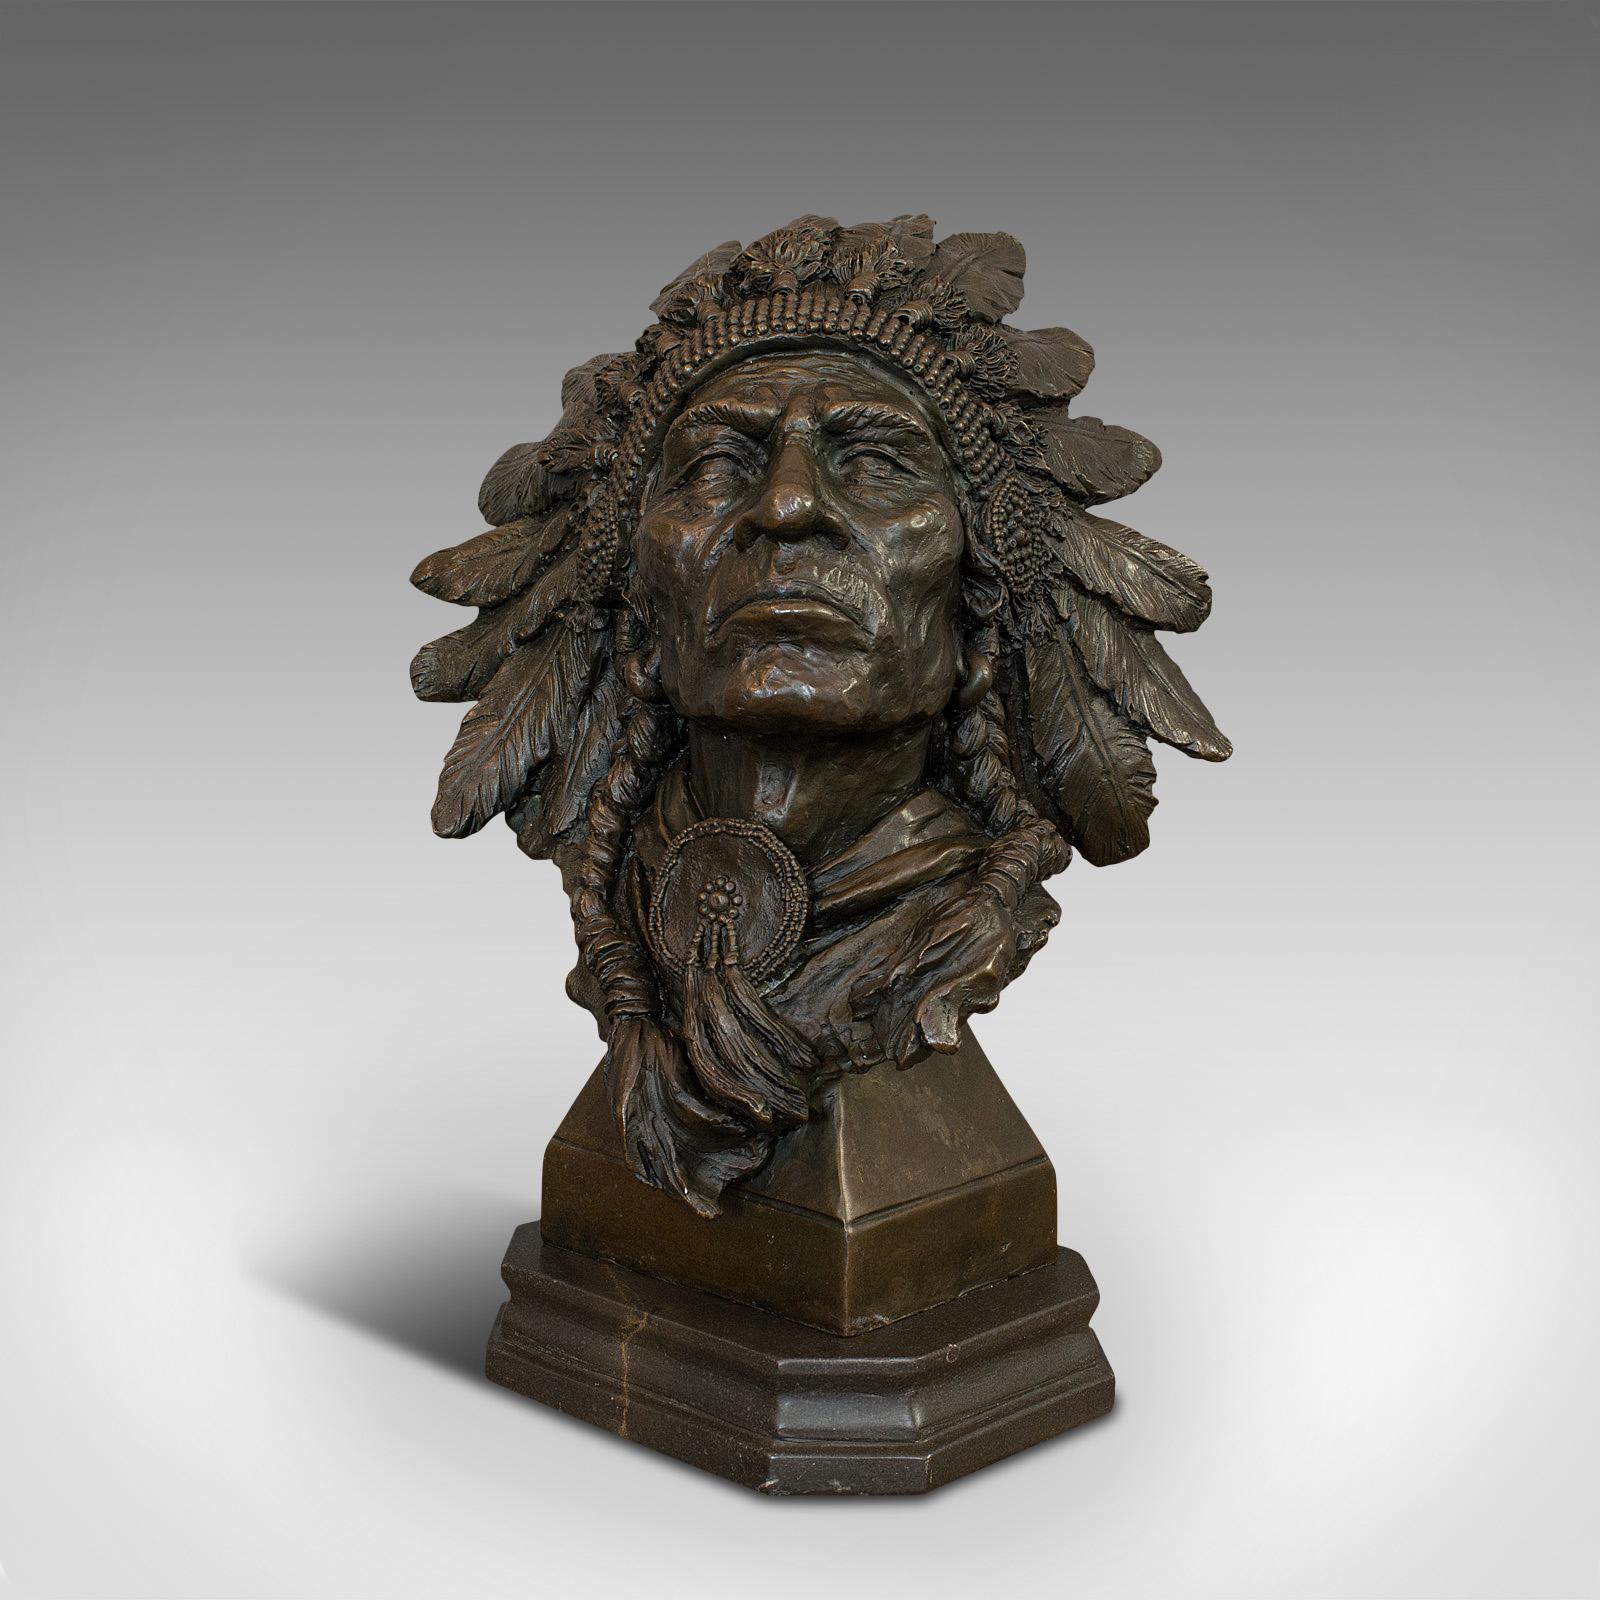 This is a large, vintage Native American chief bust. A Continental, bronze sculpture of a Sioux male in the manner of Carl Kauba (1865-1922), dating to the 20th century.

Superior weight and detail to this regal piece
Displays a desirable aged